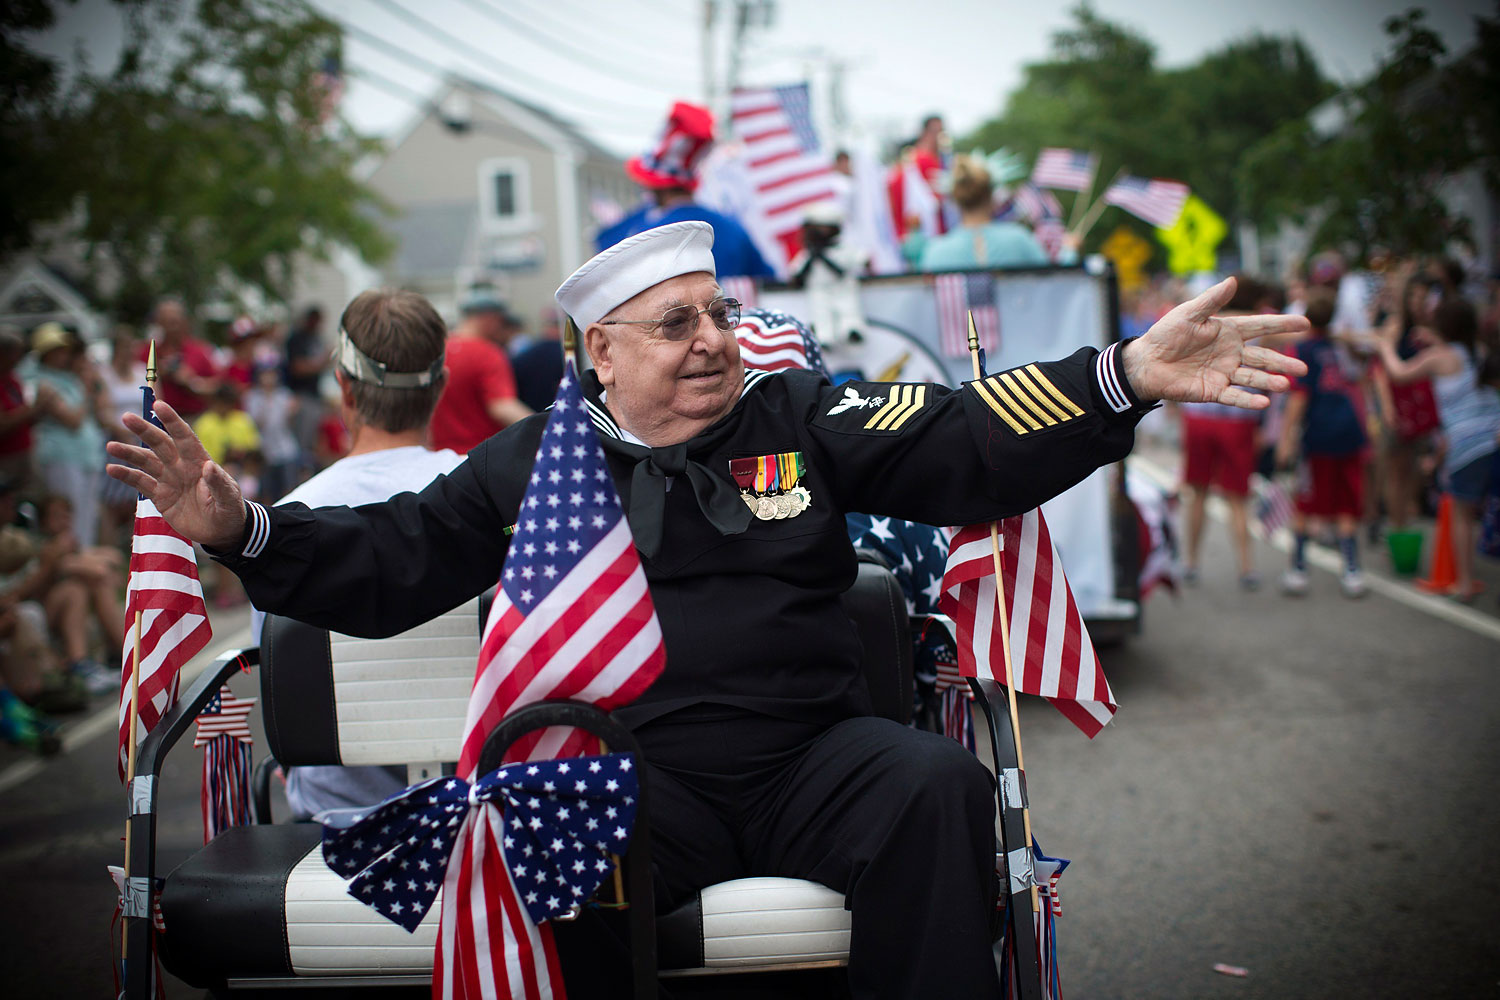 Petrus Kerras, a decorated U.S. Navy veteran of both the Korean and Vietnam wars, rides on a float in a July Fourth parade in the village of Barnstable, Massachusetts